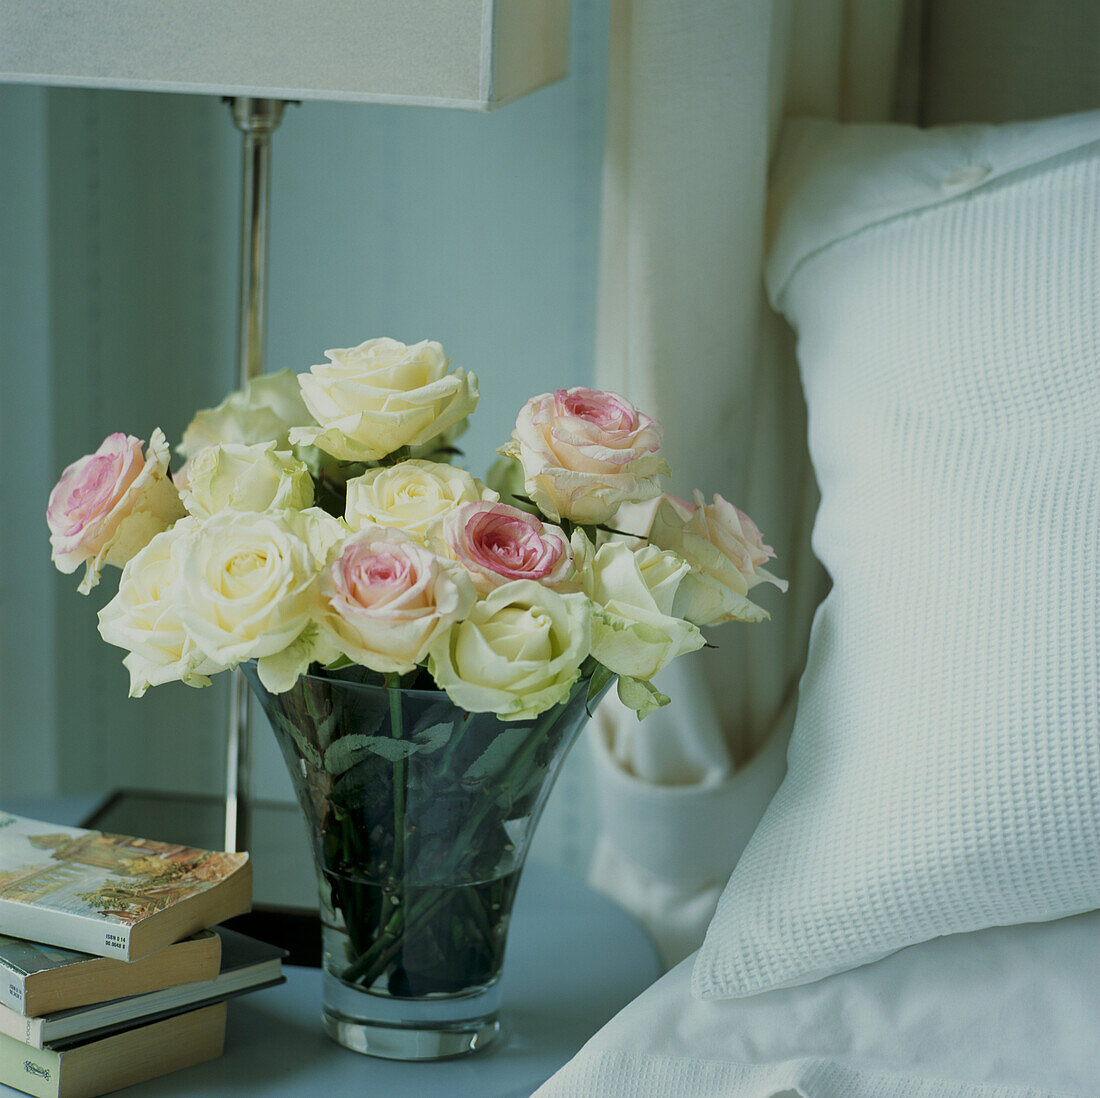 Bedside table with flower display